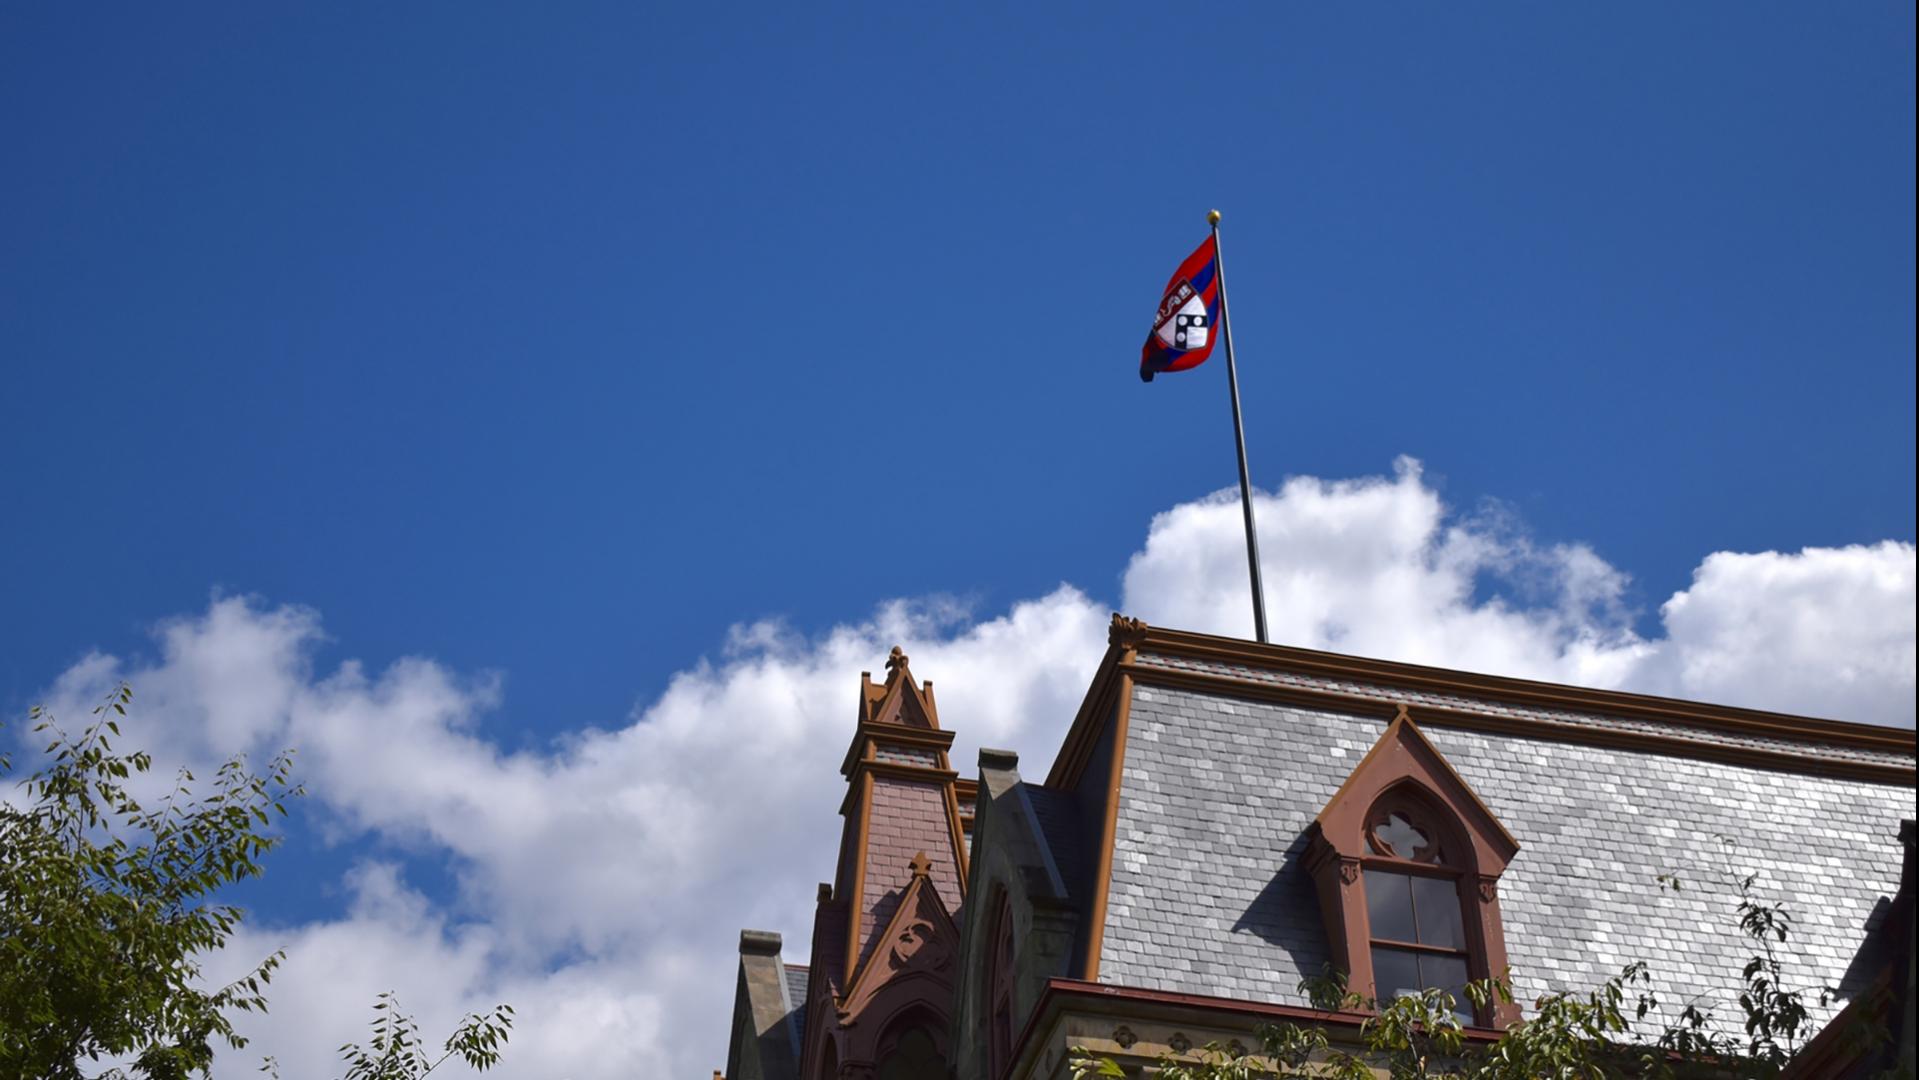 Roof of College Hall featuring the Penn flag 